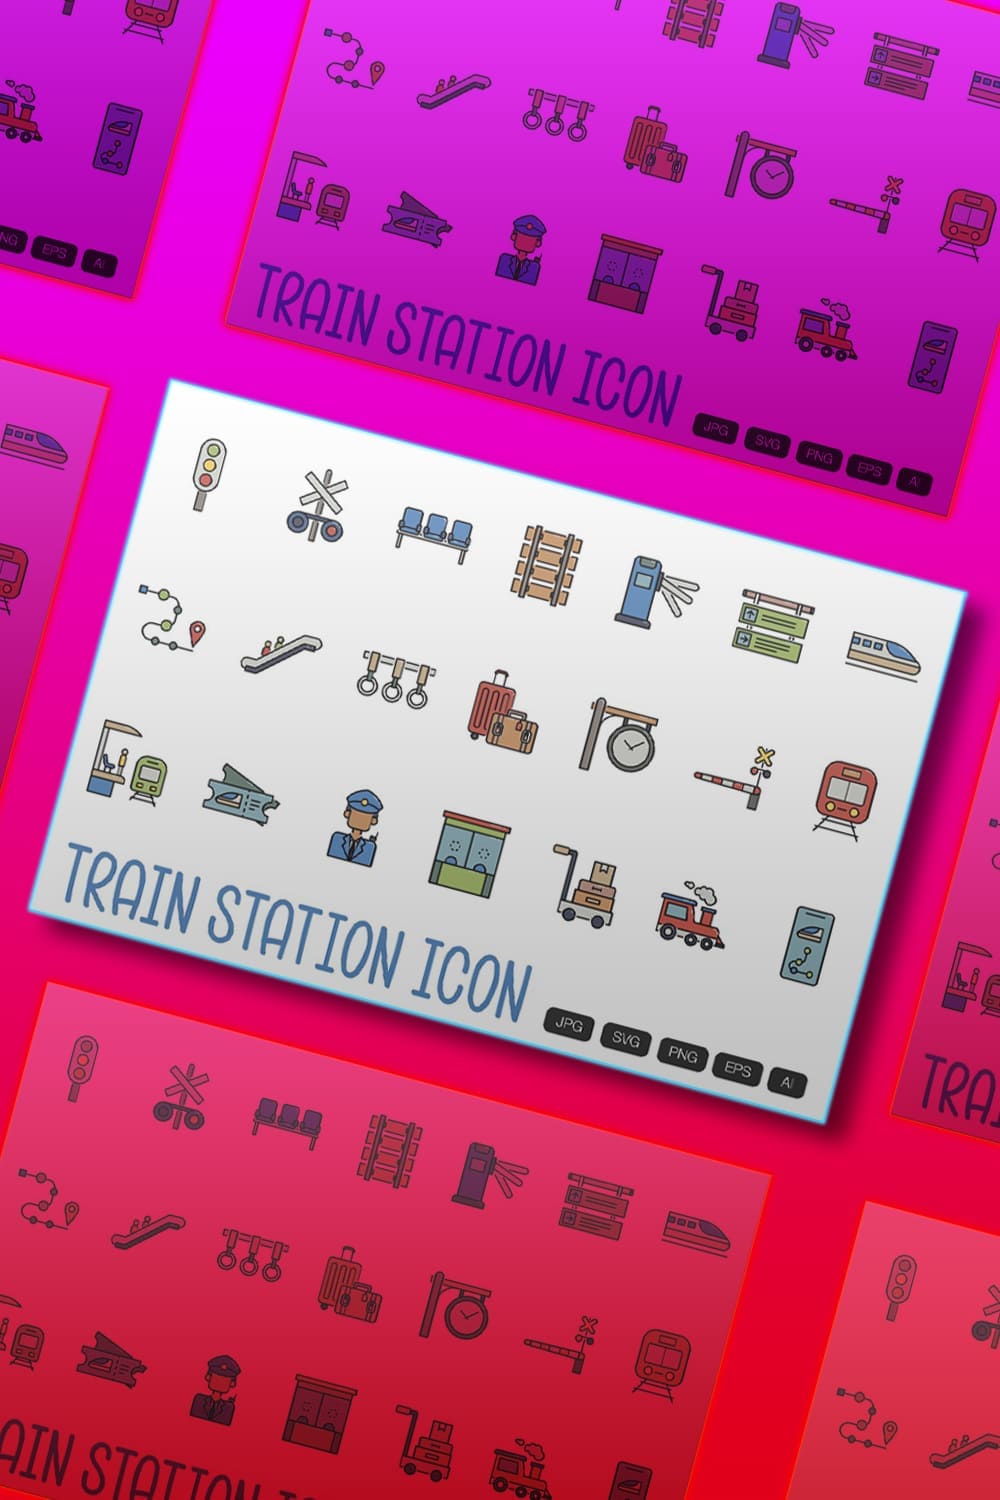 21 train station icon, picture for pinterest 1000x1500.